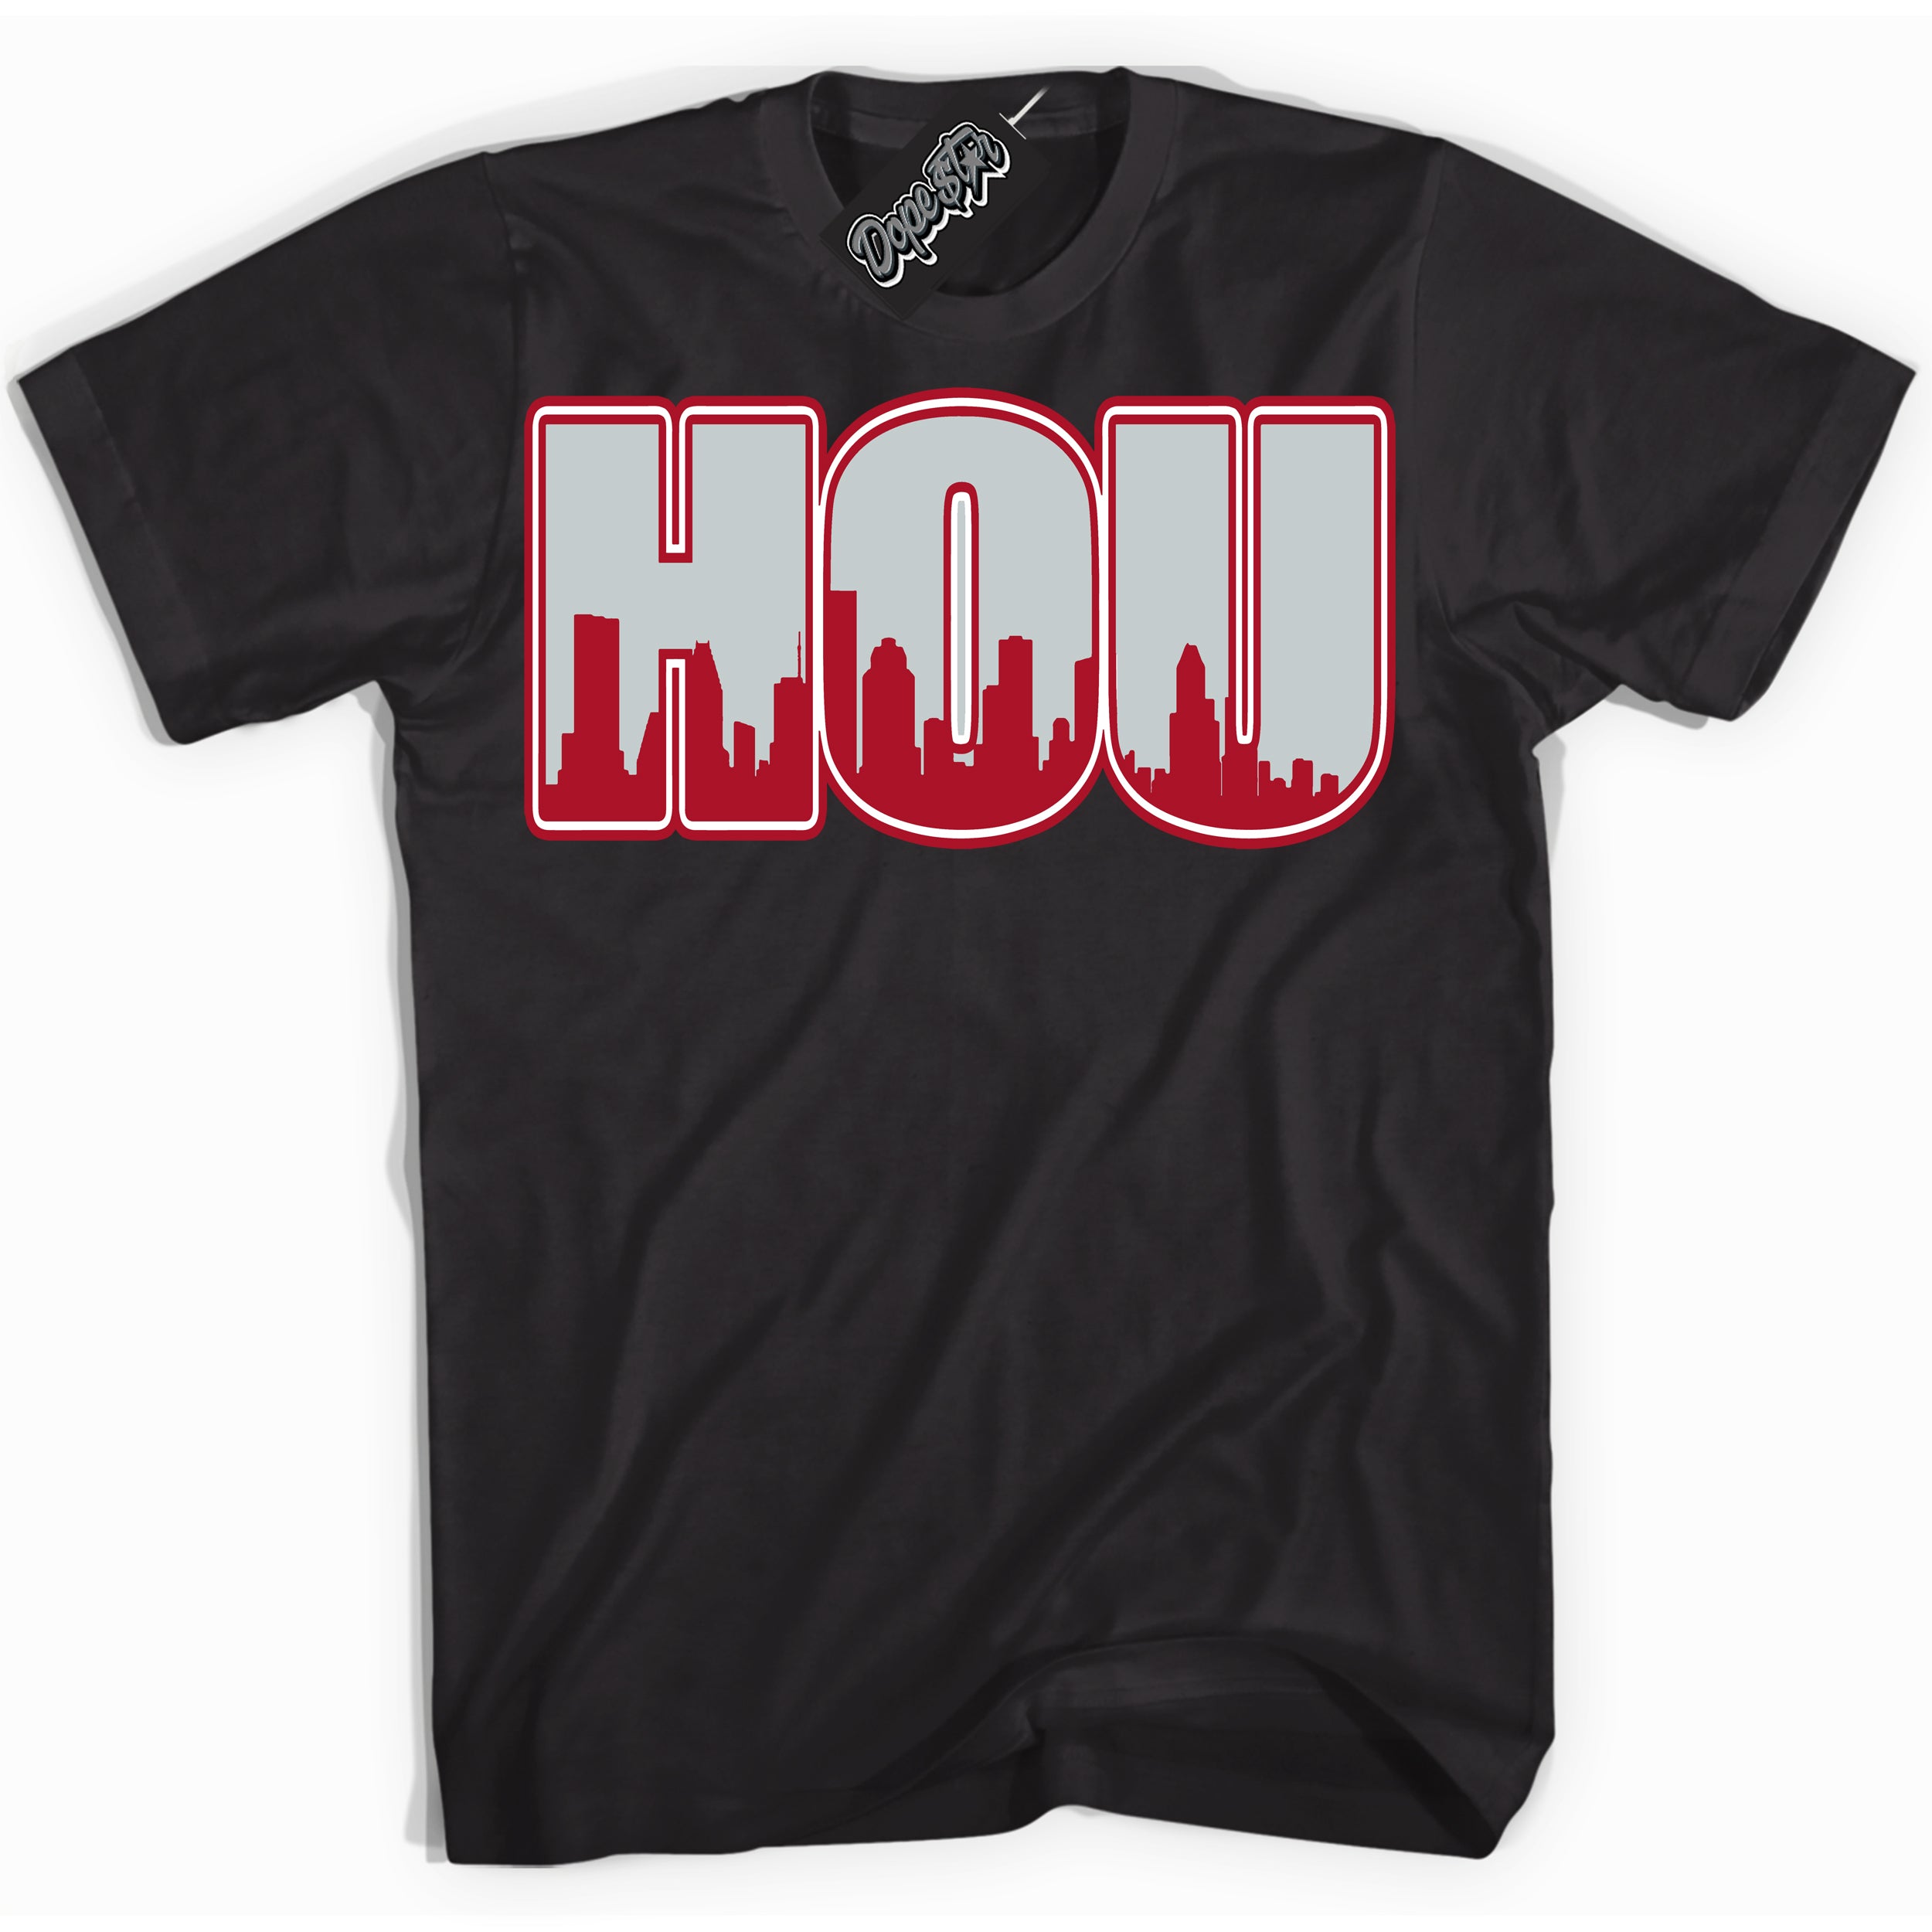 Cool Black Shirt with “ Houston” design that perfectly matches Reverse Ultraman Sneakers.